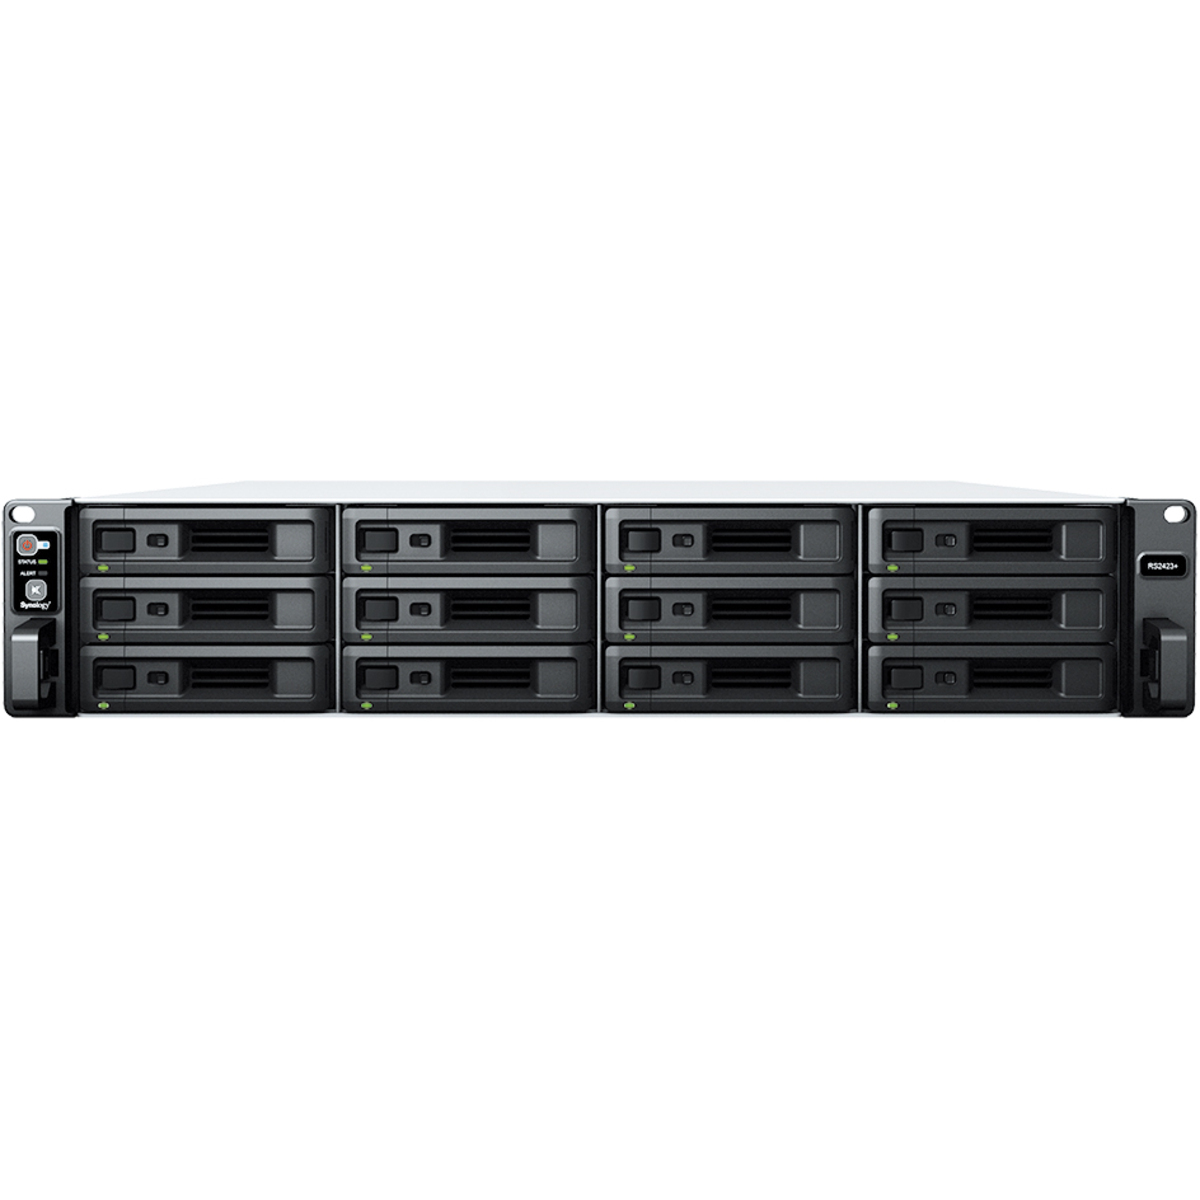 Synology RackStation RS2423RP+ 84tb 12-Bay RackMount Multimedia / Power User / Business NAS - Network Attached Storage Device 7x12tb Synology Plus Series HAT3310-12T 3.5 7200rpm SATA 6Gb/s HDD NAS Class Drives Installed - Burn-In Tested - FREE RAM UPGRADE RackStation RS2423RP+